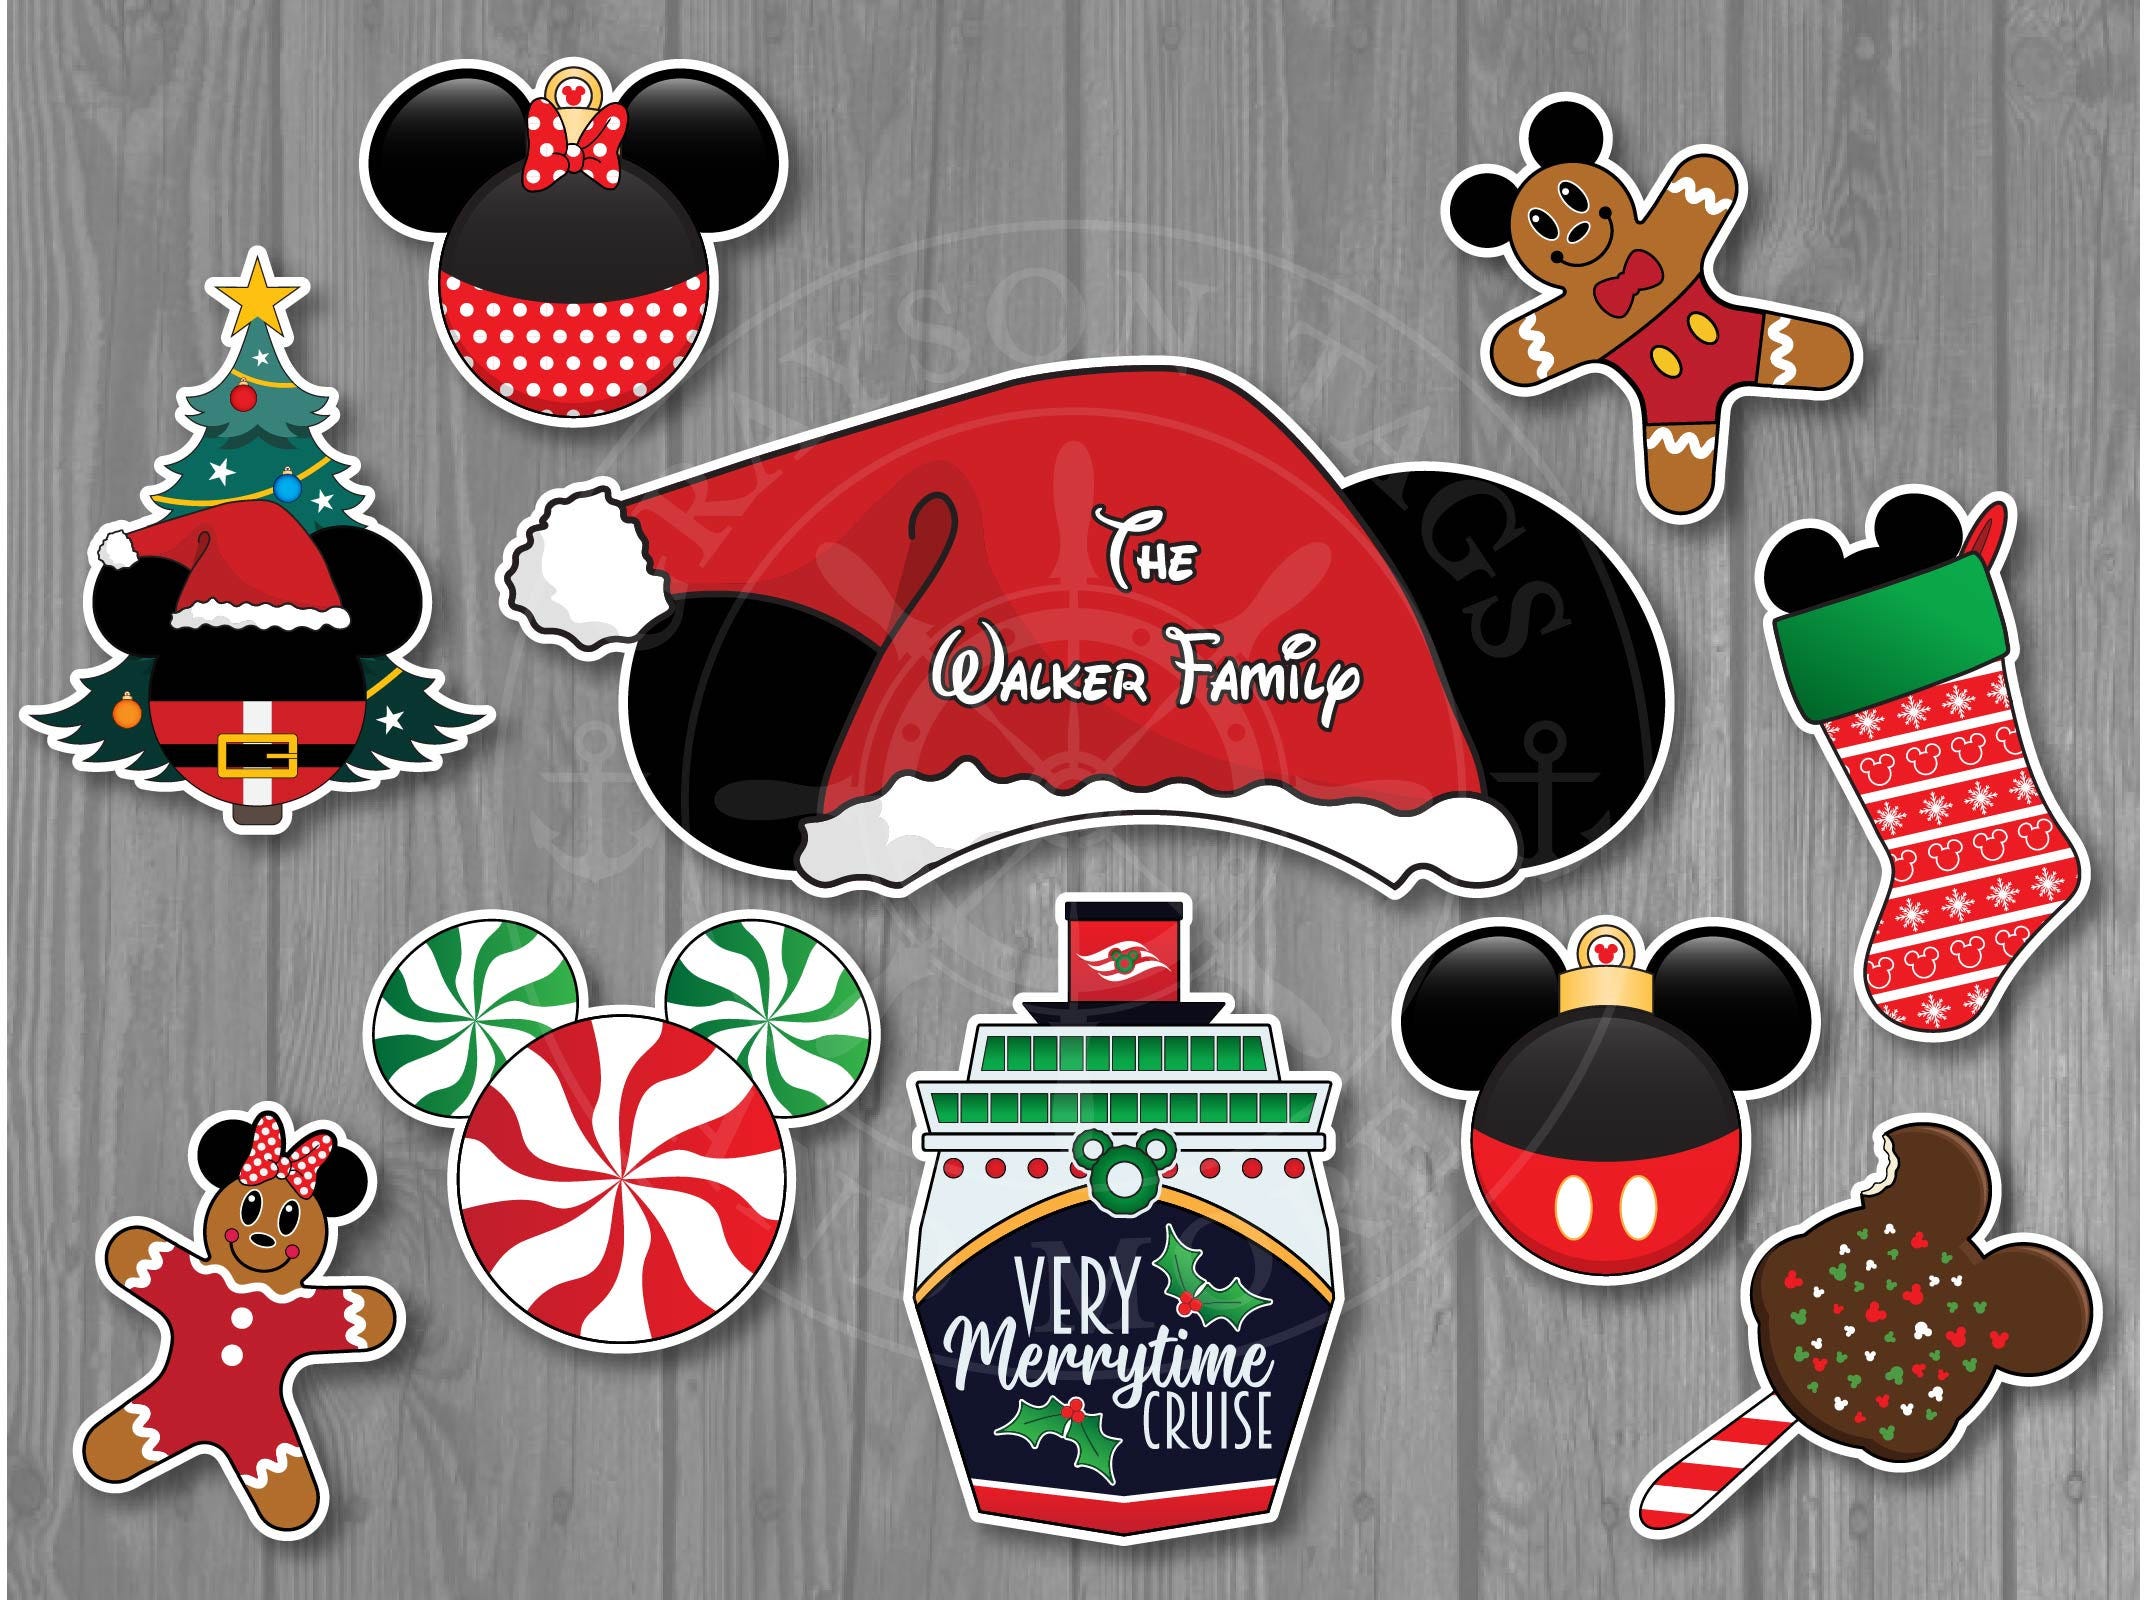 Very Merrytime Personalized Sign Group Magnet Set for Disney Cruise Doors